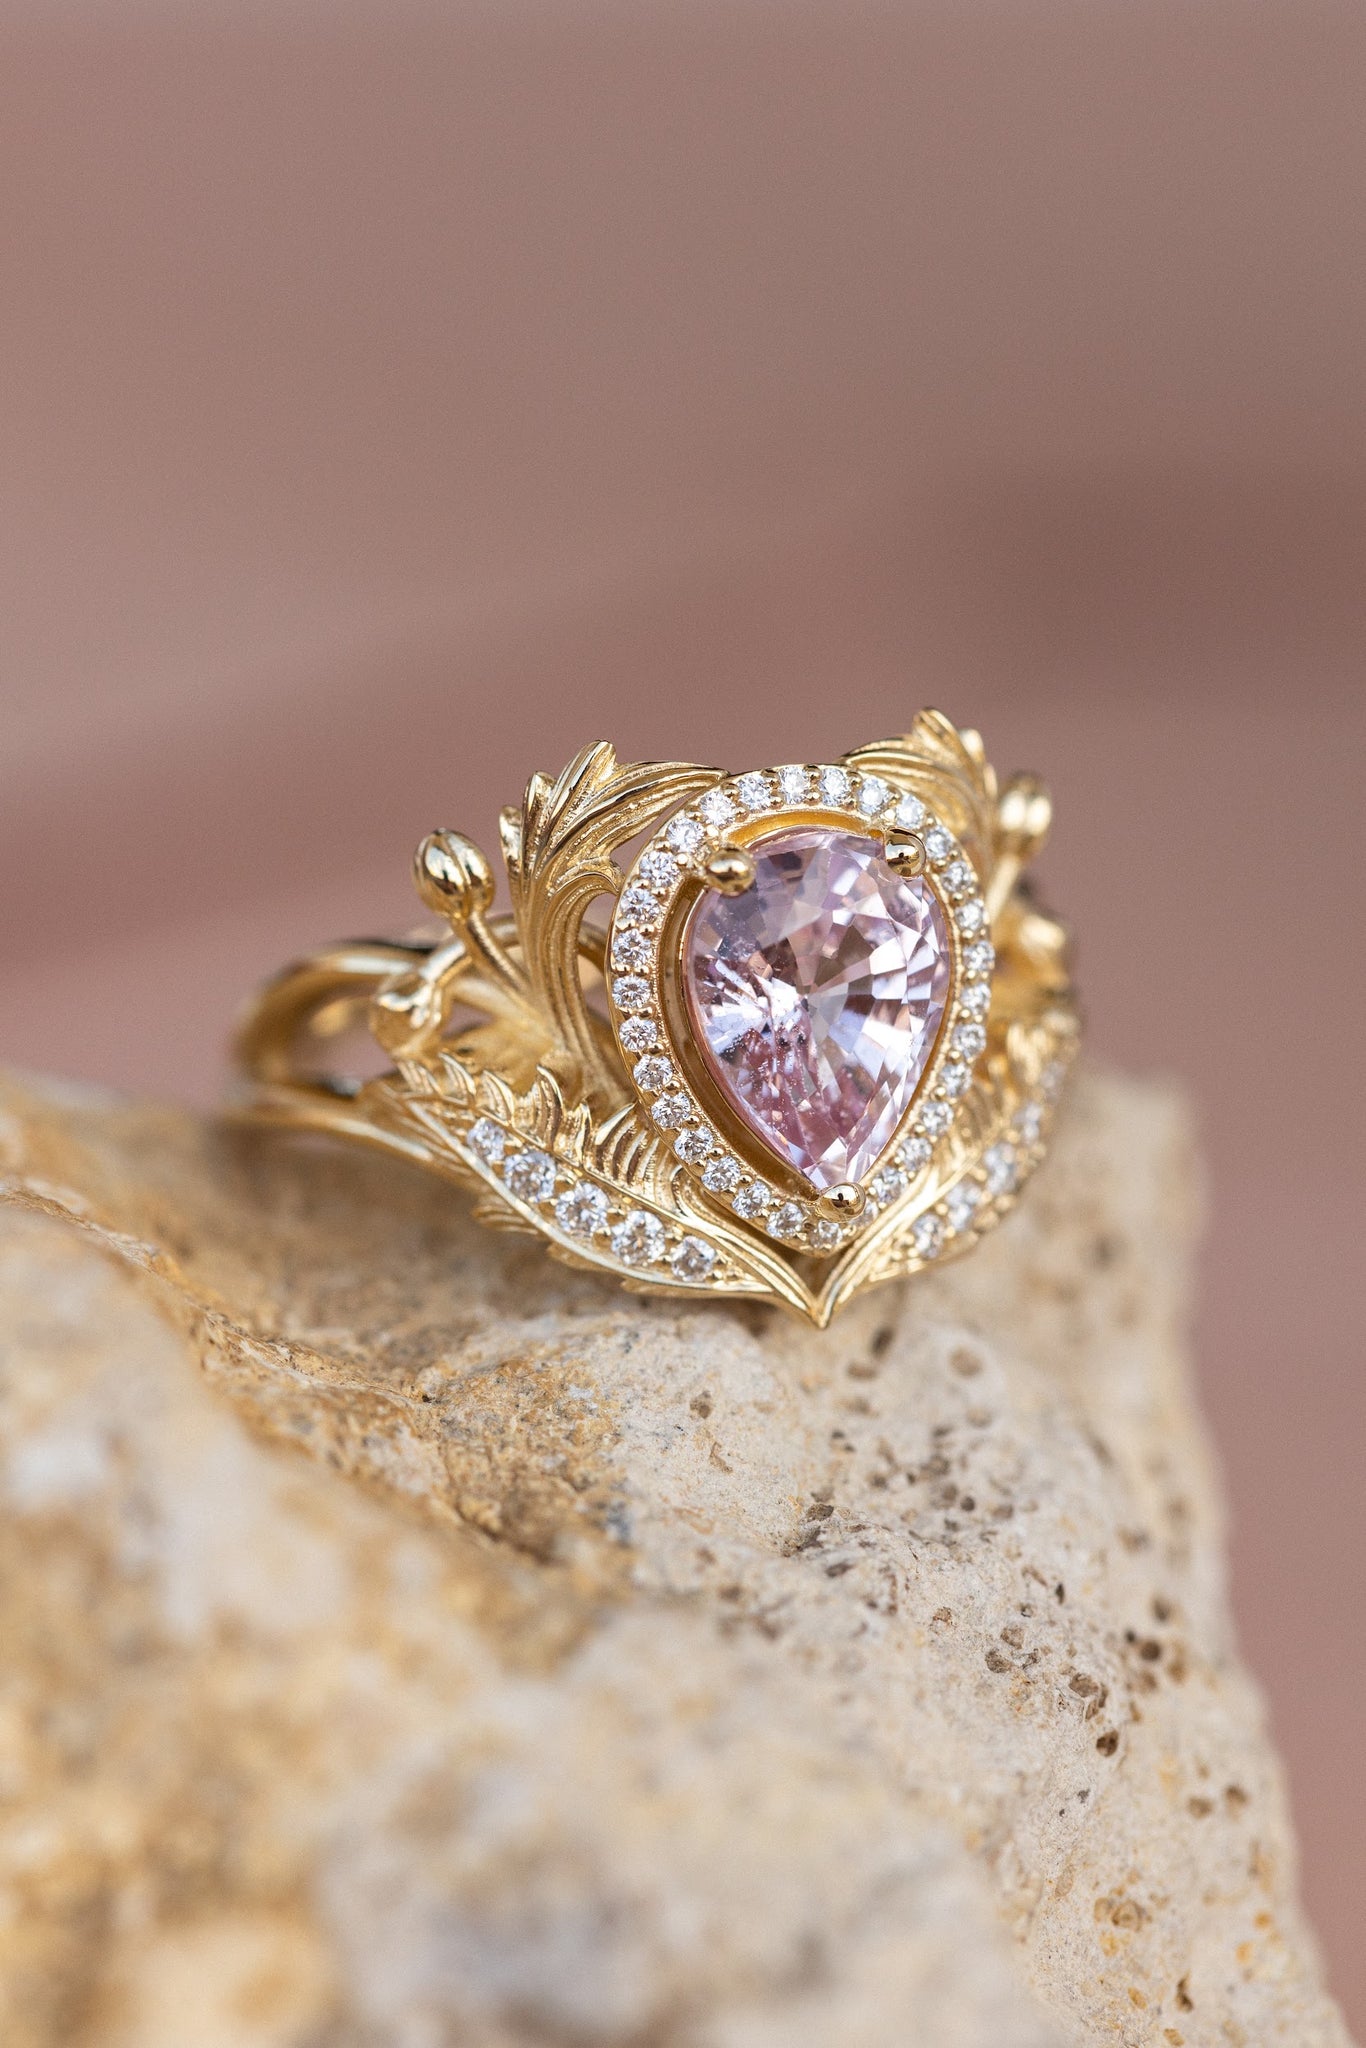 Pear pink sapphire engagement ring, gold nature inspired ring with diamond halo / Adonis halo - Eden Garden Jewelry™